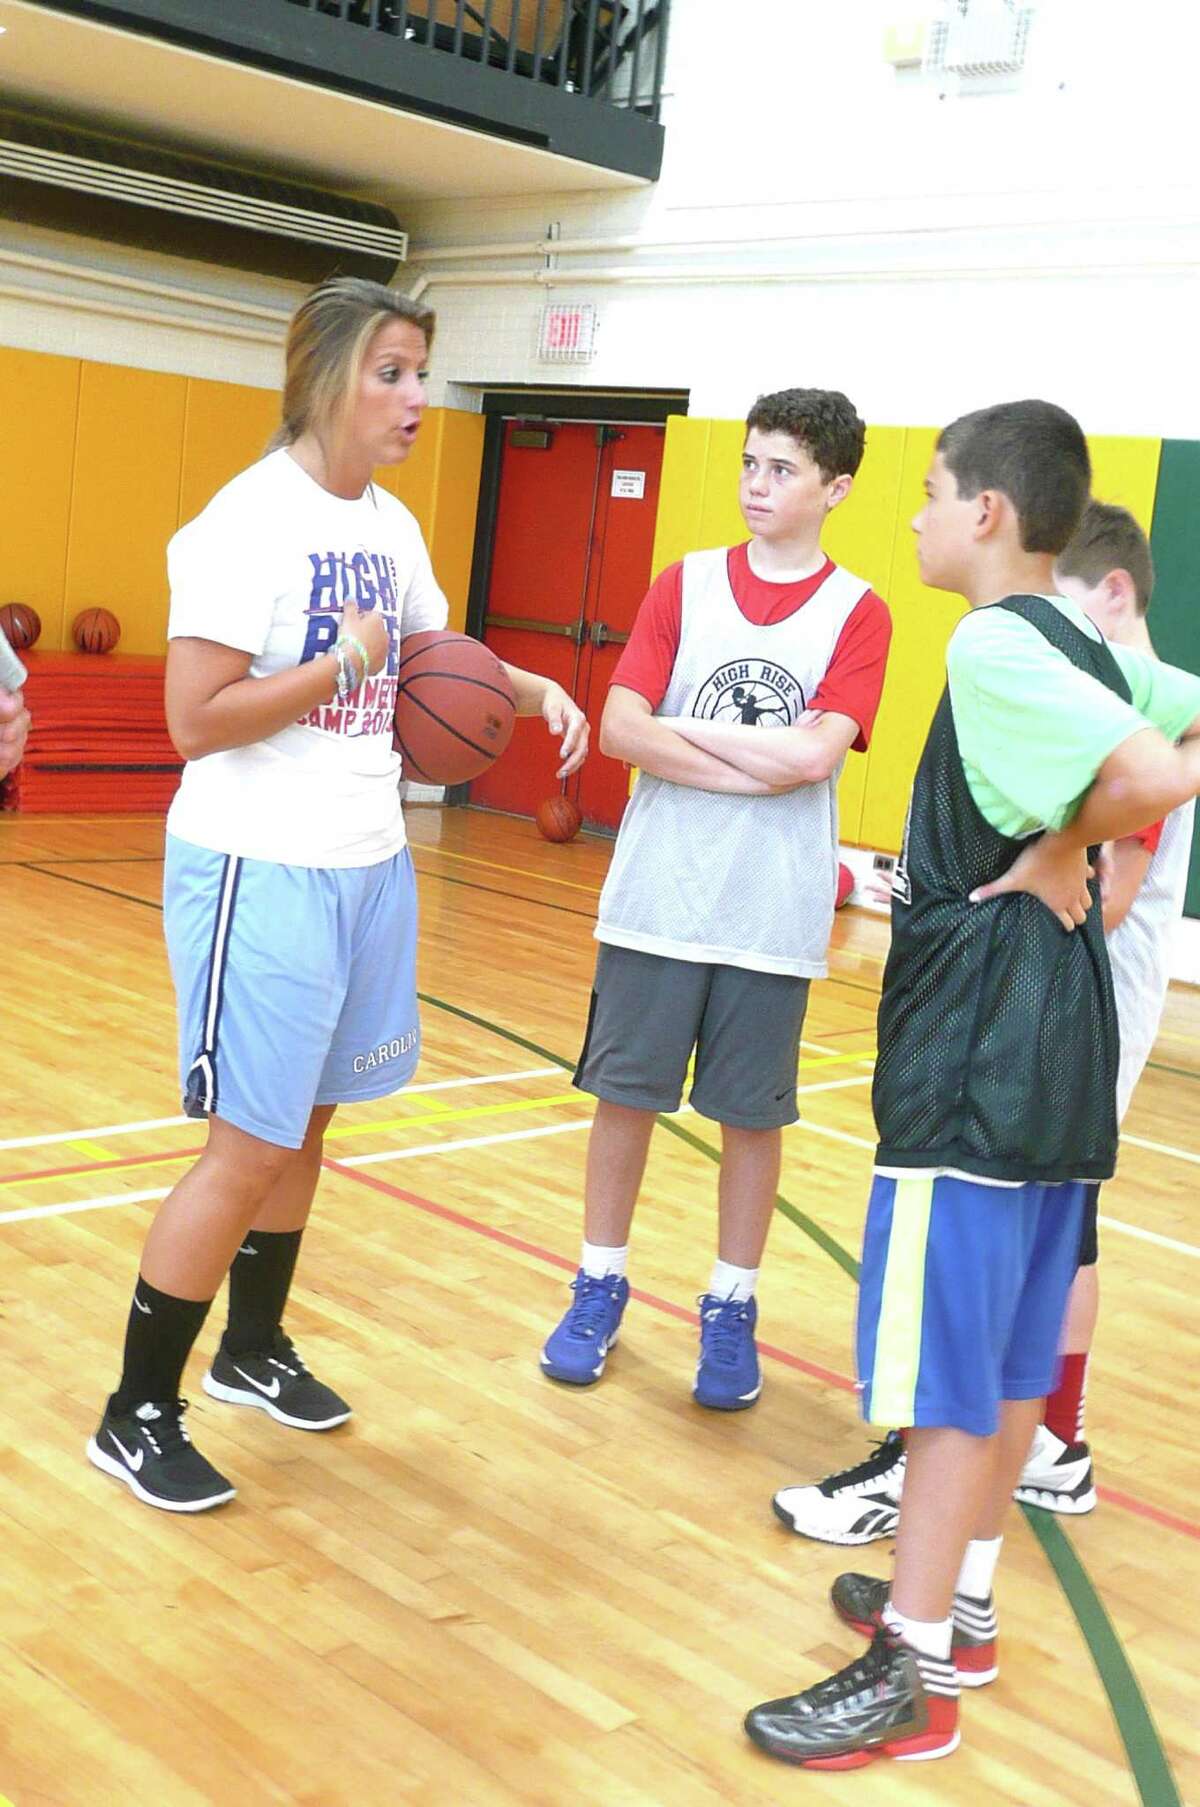 Former Greenwich High School and Wheaton College hoop star Jana Jagodzinski wants to keep her hand in the game she loves so she worked this summer coaching at the High Rise Academy basketball camp, which was held at Eagle Hill School. "I absolutely love coaching the kids at High Rise Basketball Camp," she says.